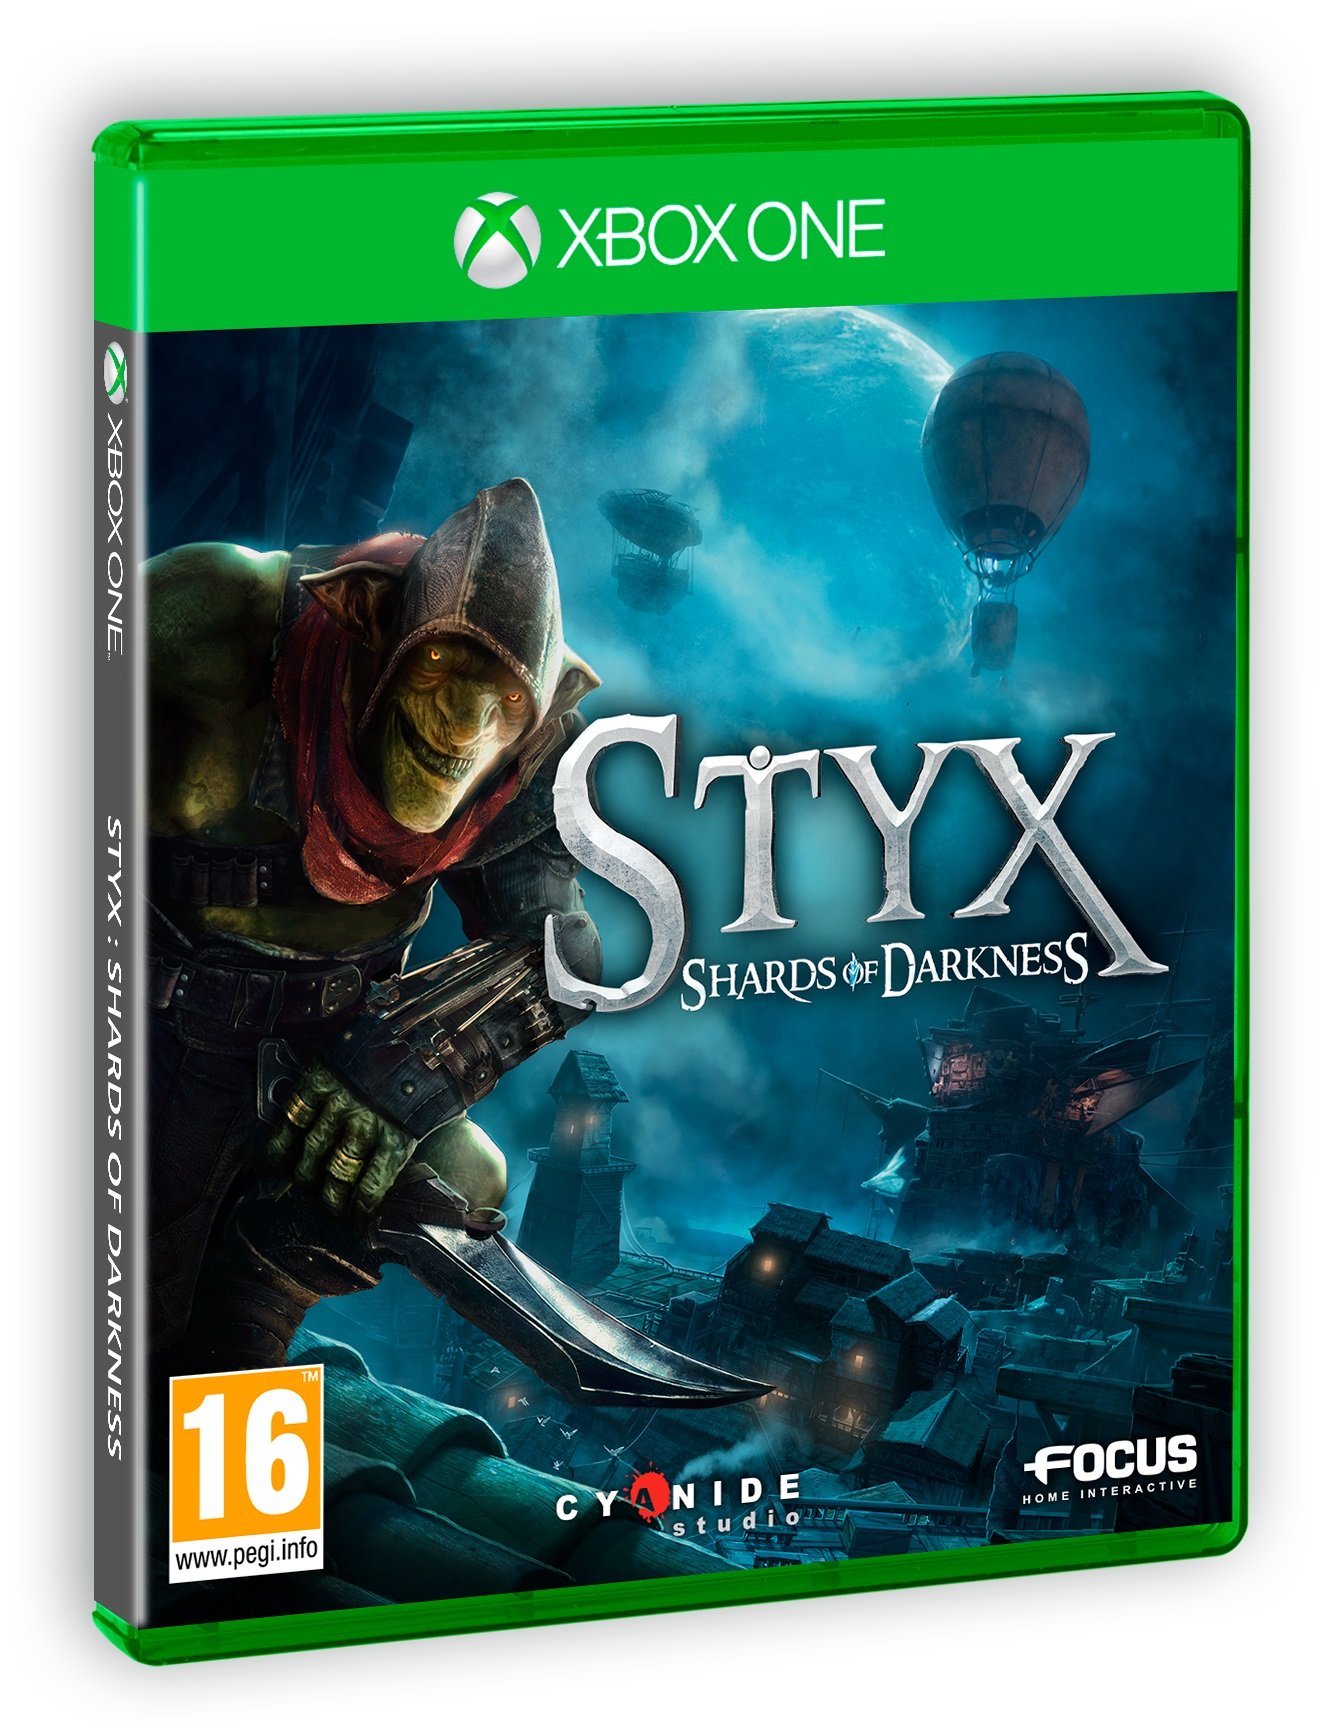 styx shards of darkness xbox one download free